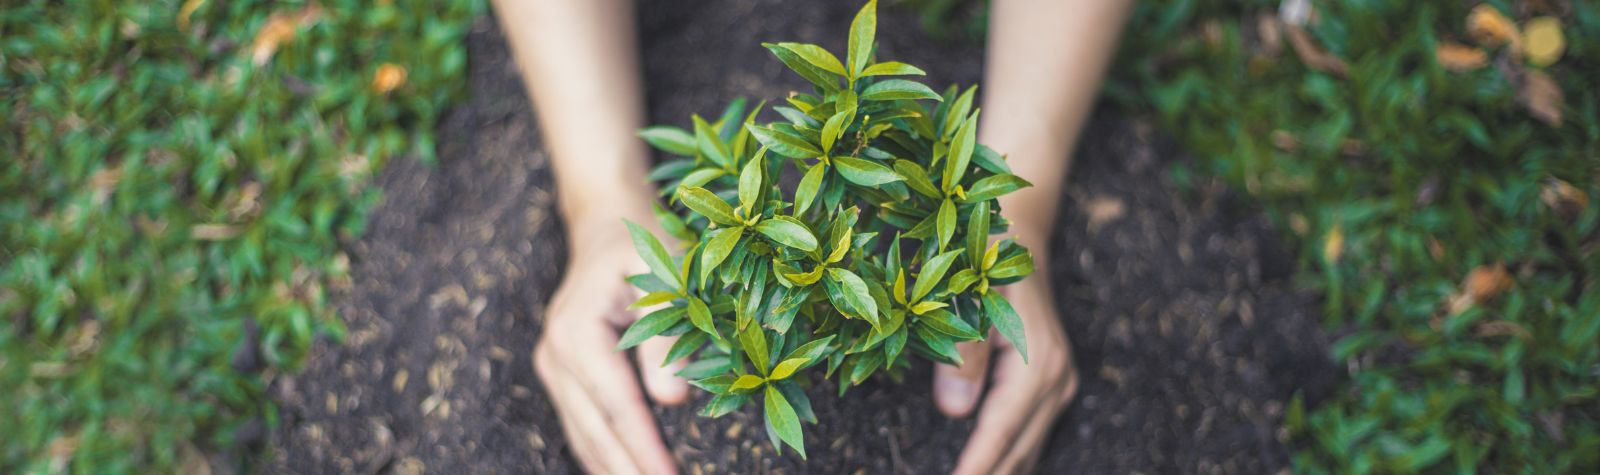 6 ways plants contribute to healthy living